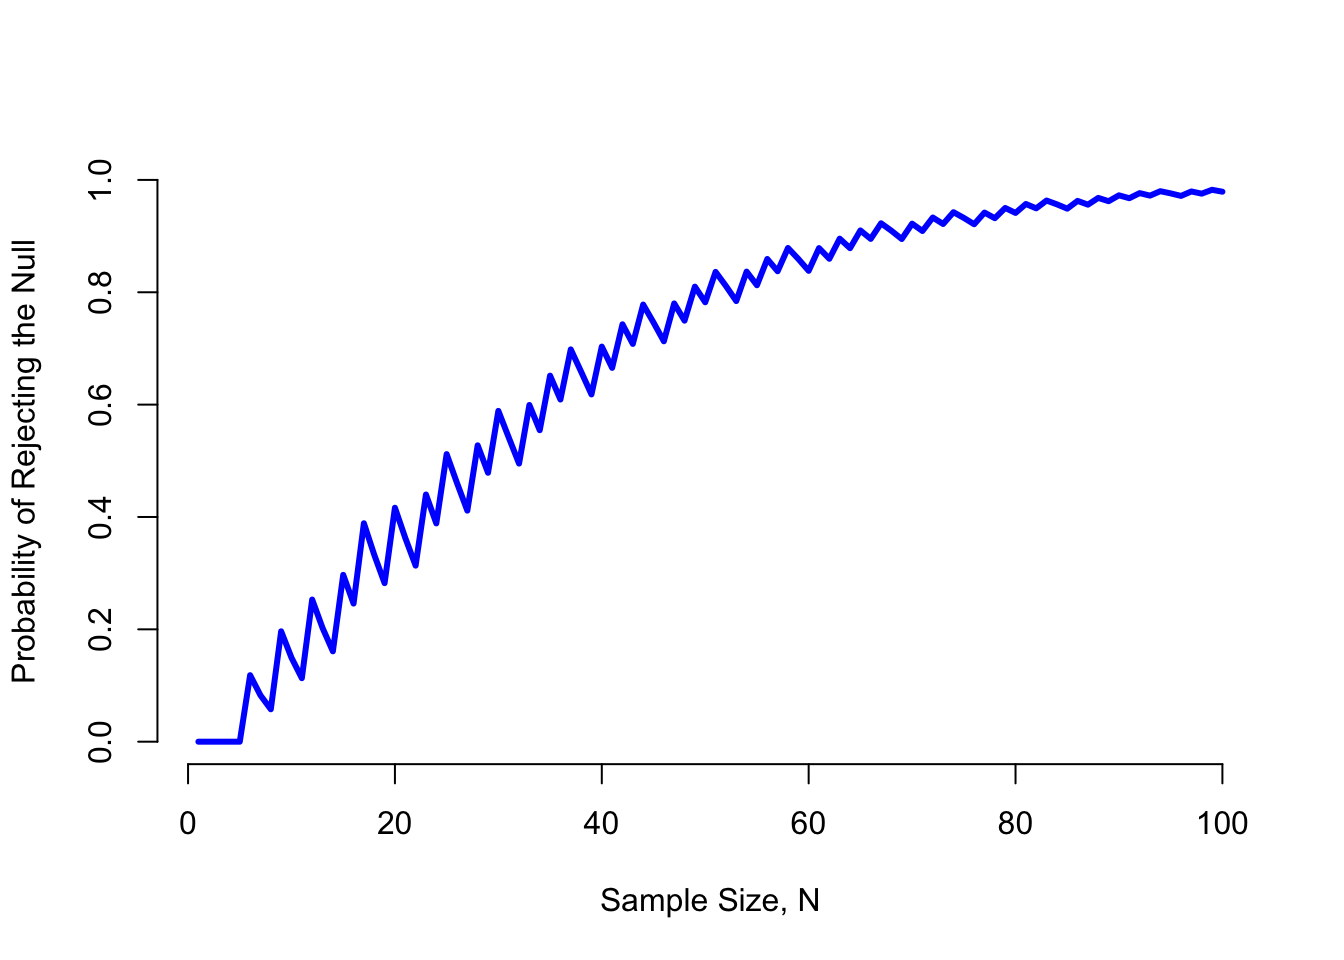 The power of our test, plotted as a function of the sample size $N$. In this case, the true value of $\theta$ is 0.7, but the null hypothesis is that $\theta = 0.5$. Overall, larger $N$ means greater power. (The small zig-zags in this function occur because of some odd interactions between $\theta$, $\alpha$ and the fact that the binomial distribution is discrete; it doesn't matter for any serious purpose) 